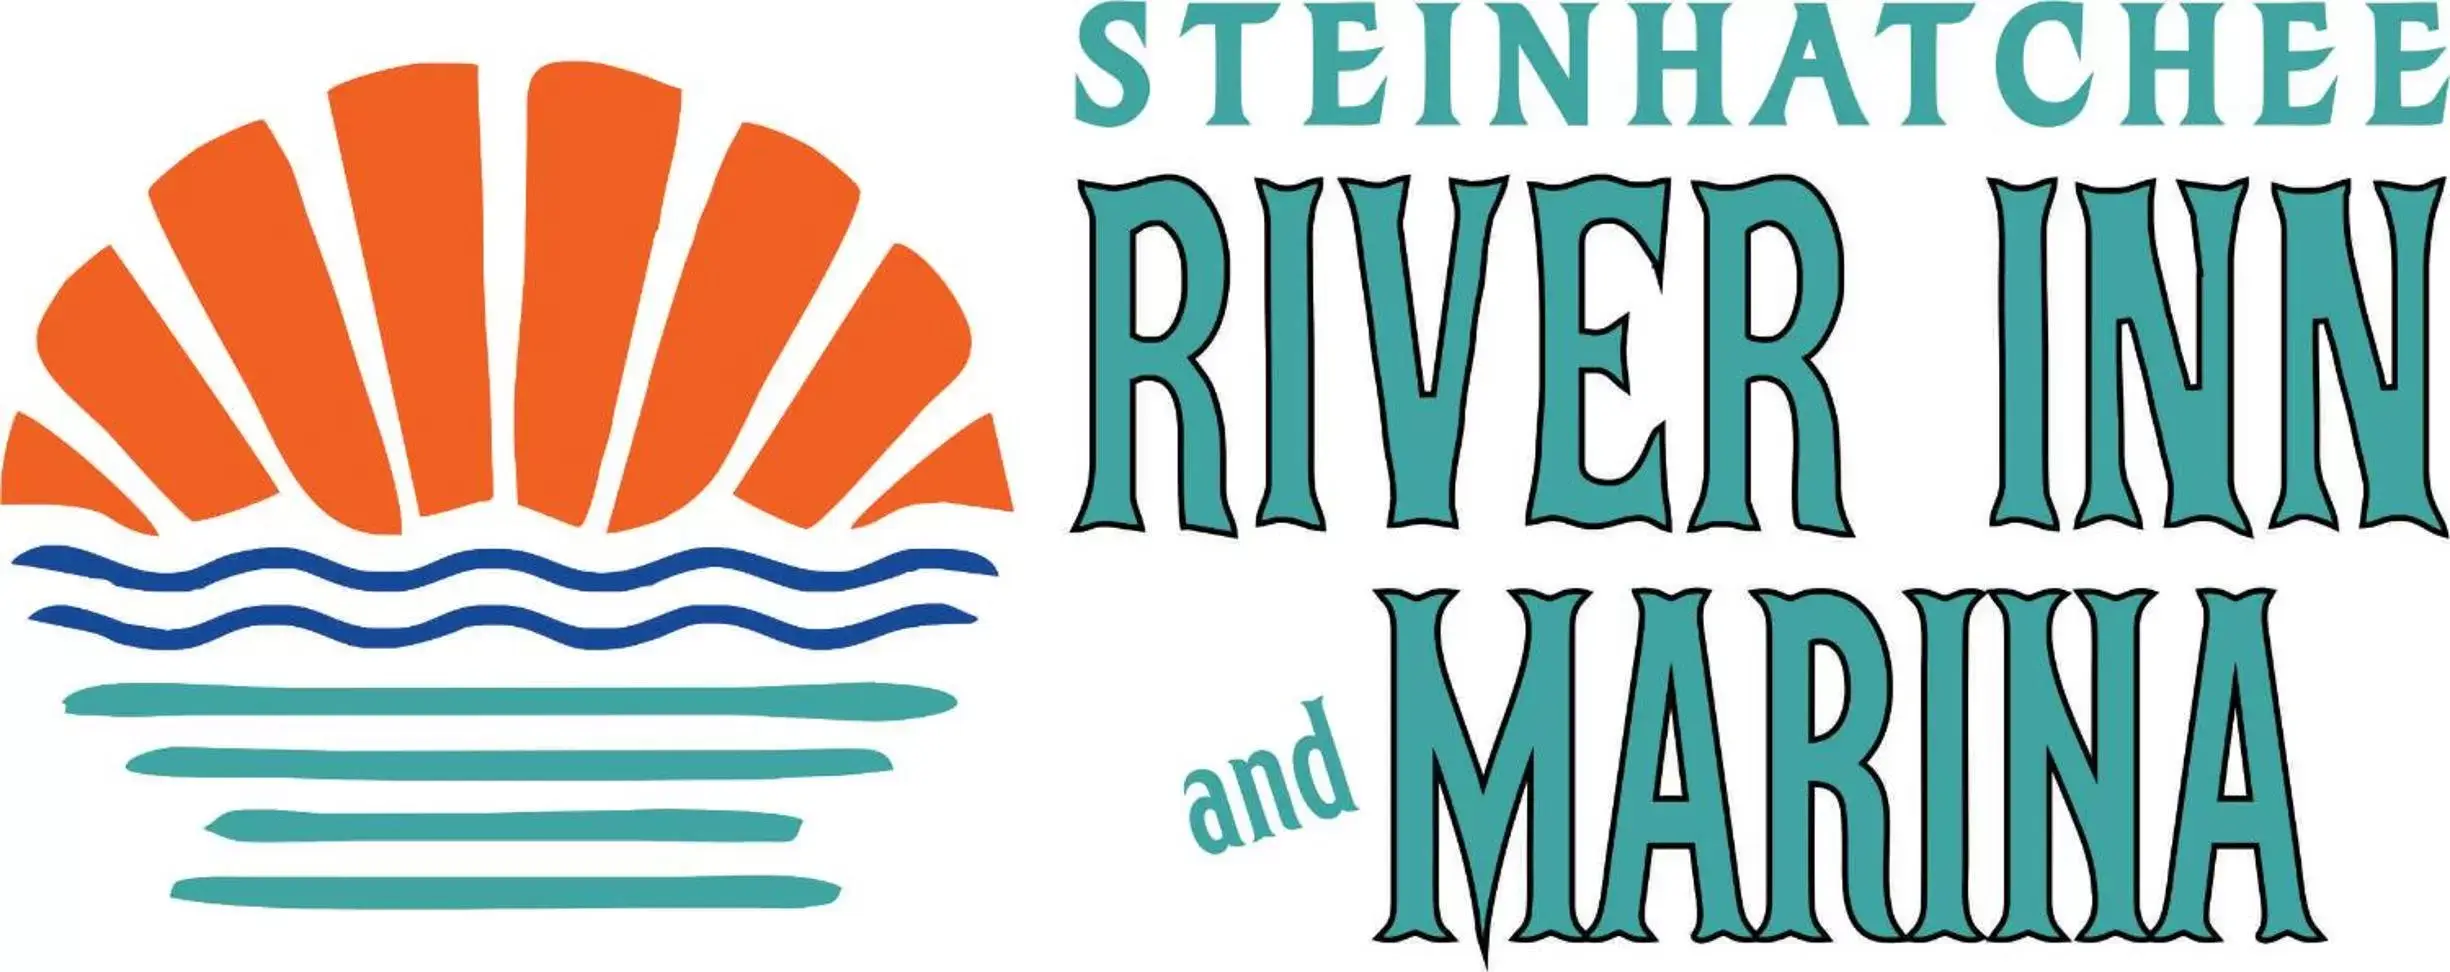 Property logo or sign in Steinhatchee River Inn and Marina